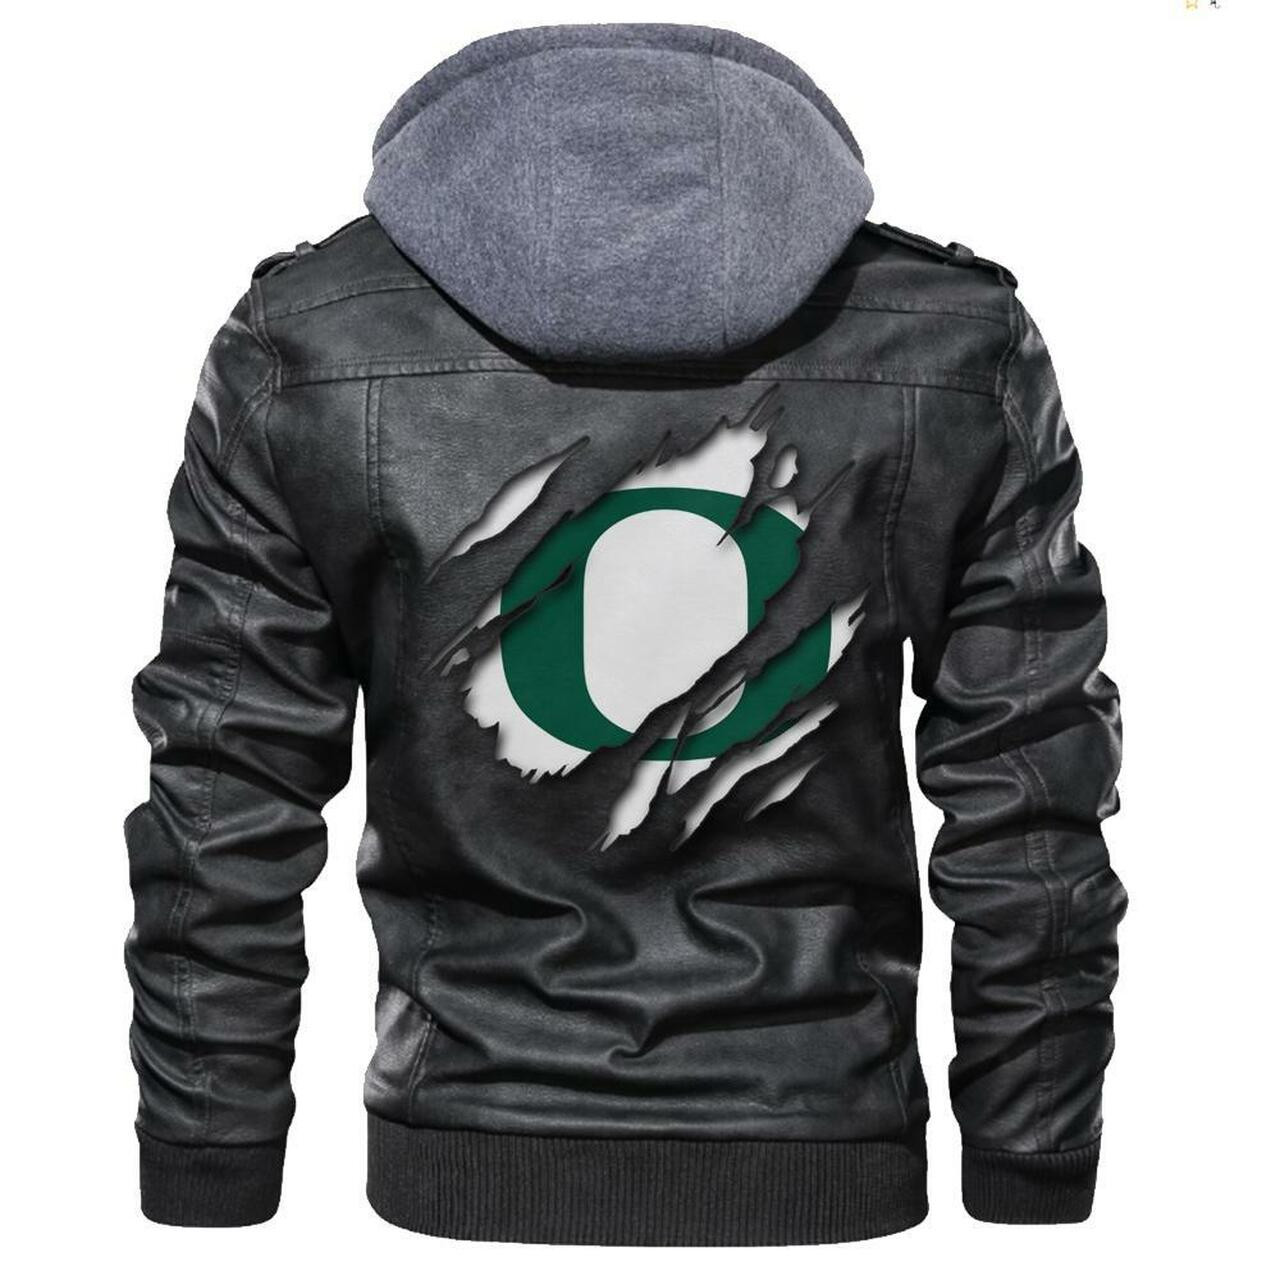 This leather Jacket will look great on you and make you stand out from the crowd 87